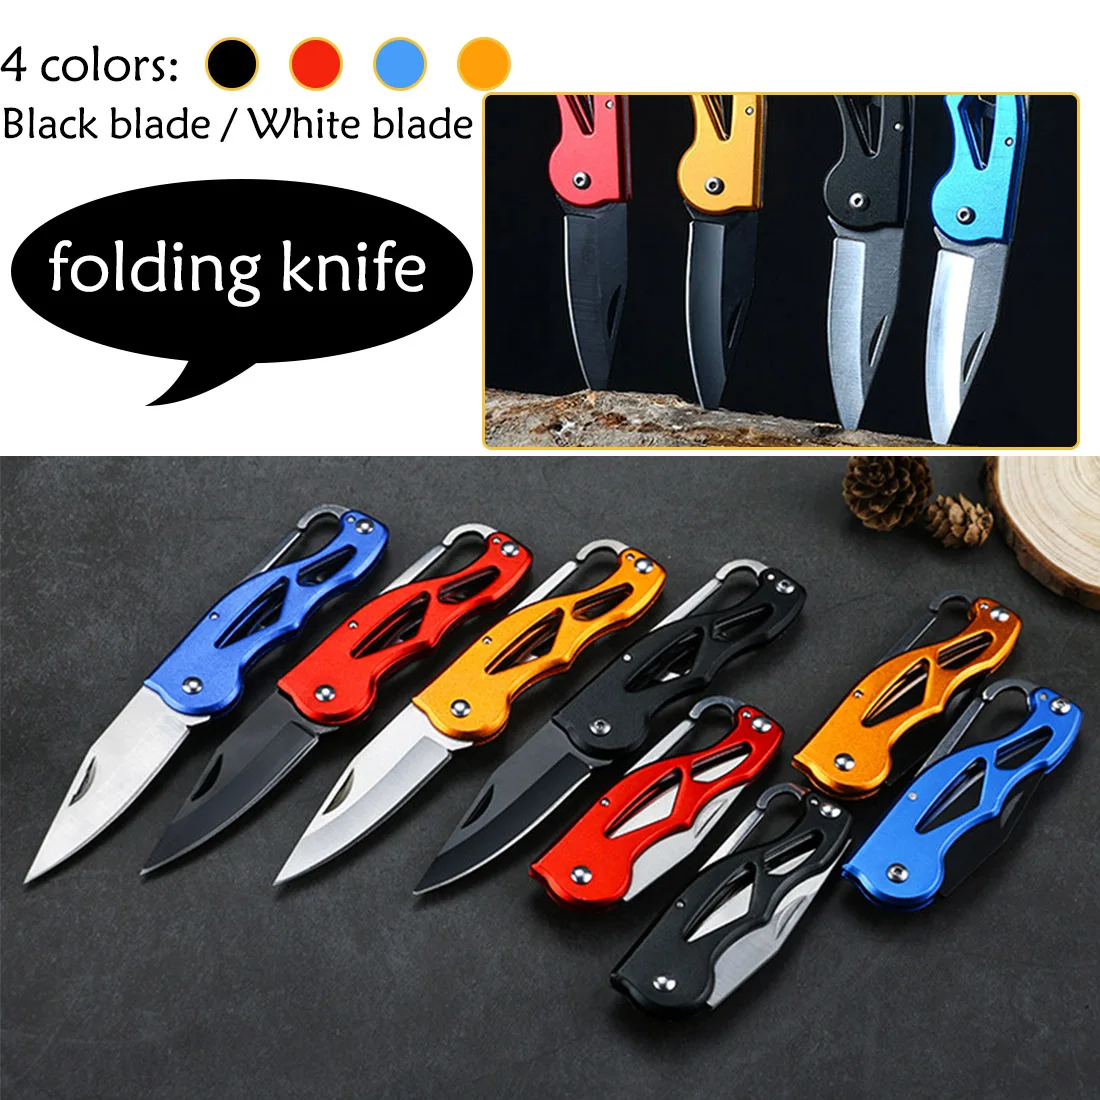 

Multifunction Folding Knife Portable Key Ring Camping Mini Peeler Keychain Tactical Rescue Survival Outdoor Tool High Quality